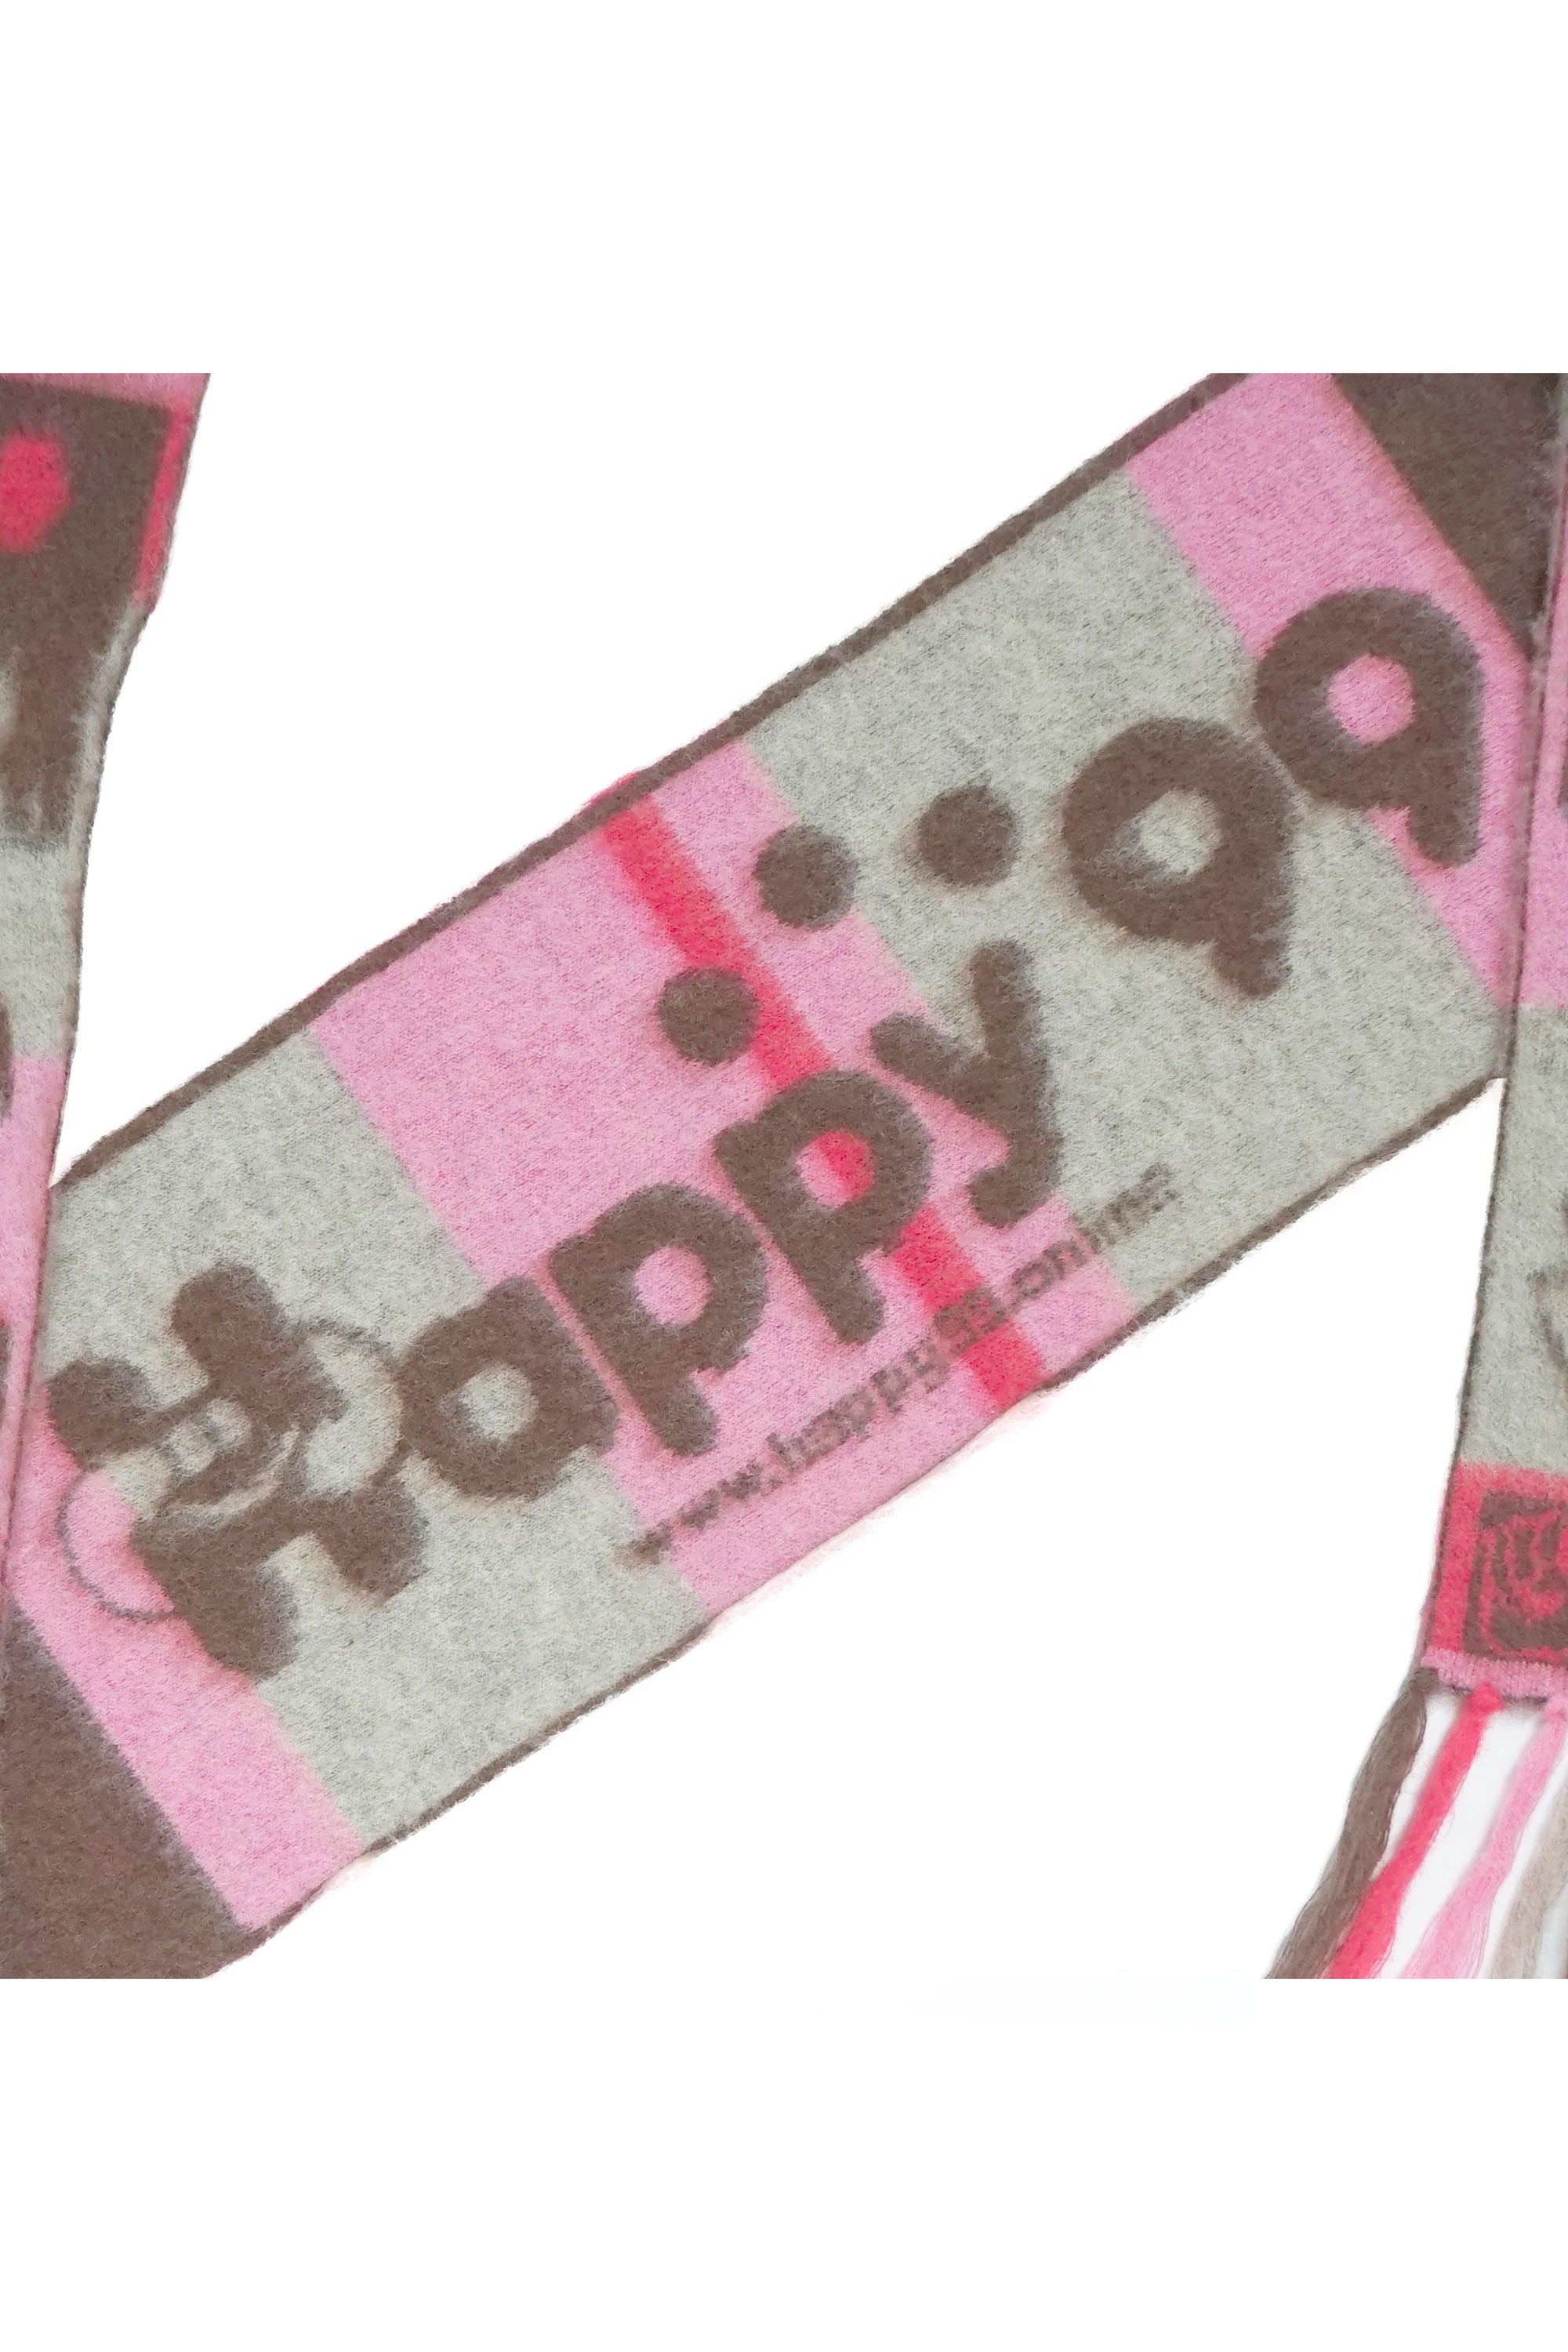 The HAPPY 99 - +2 AGILITY SCARF  available online with global shipping, and in PAM Stores Melbourne and Sydney.